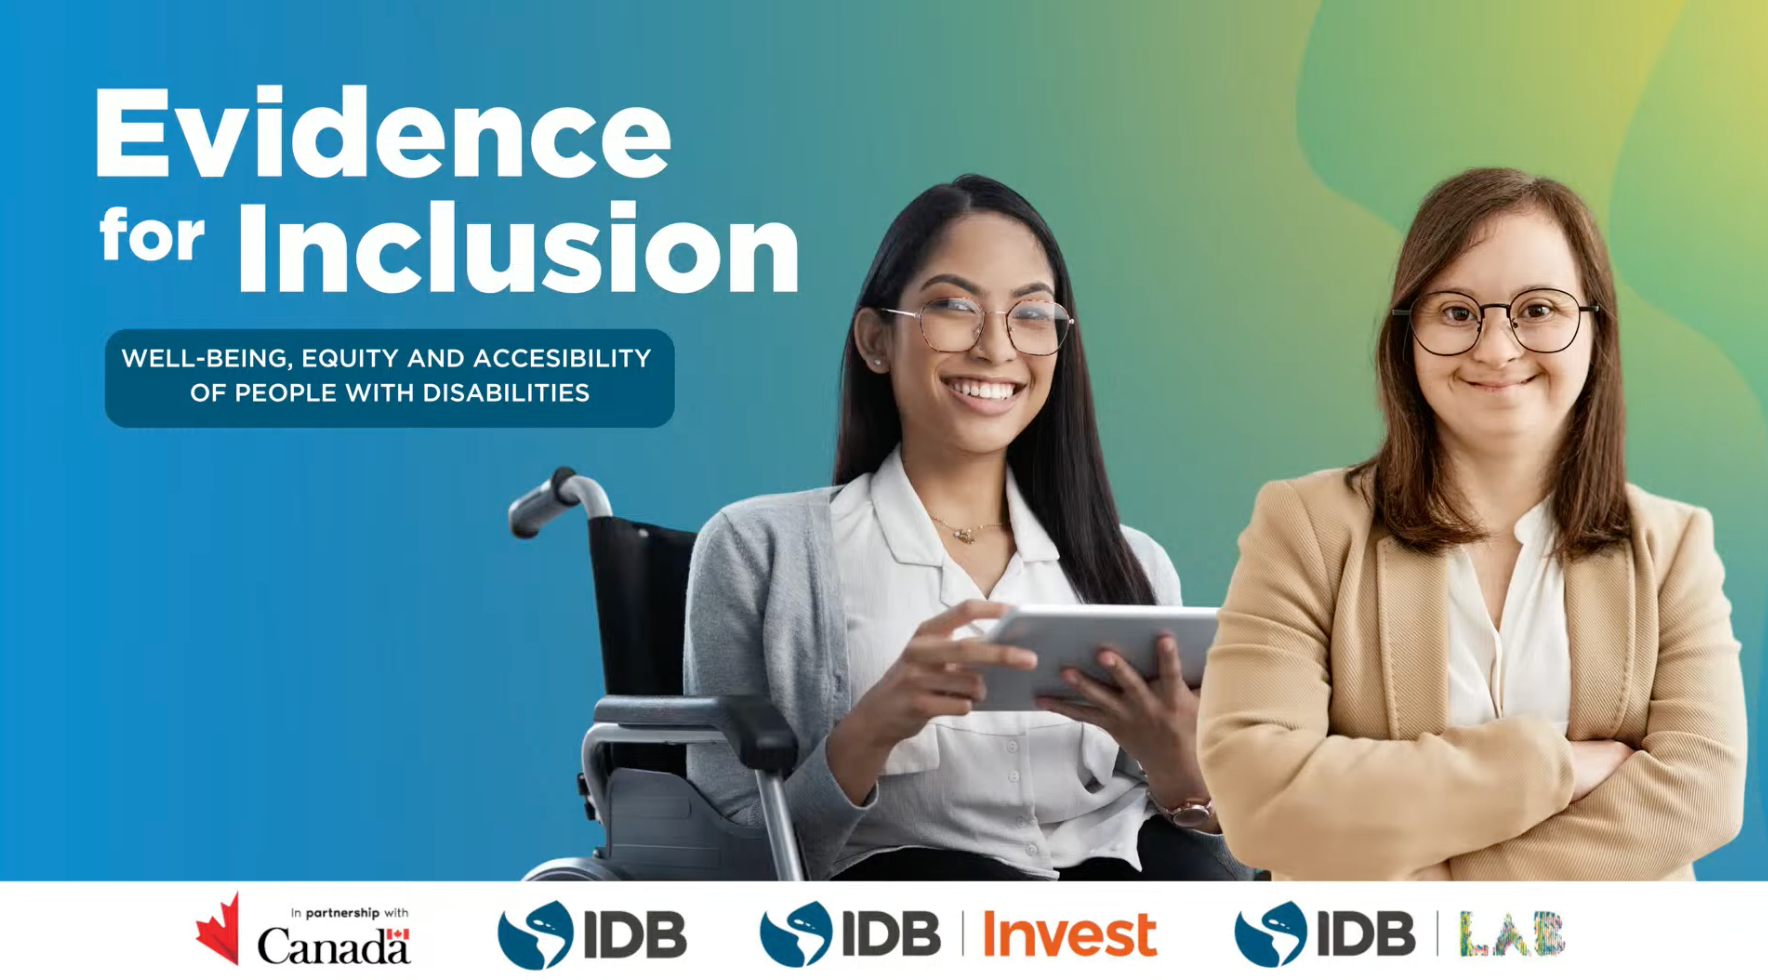 Evidence for Inclusion: Well-being, Equity, and Accessibility of People with Disabilities